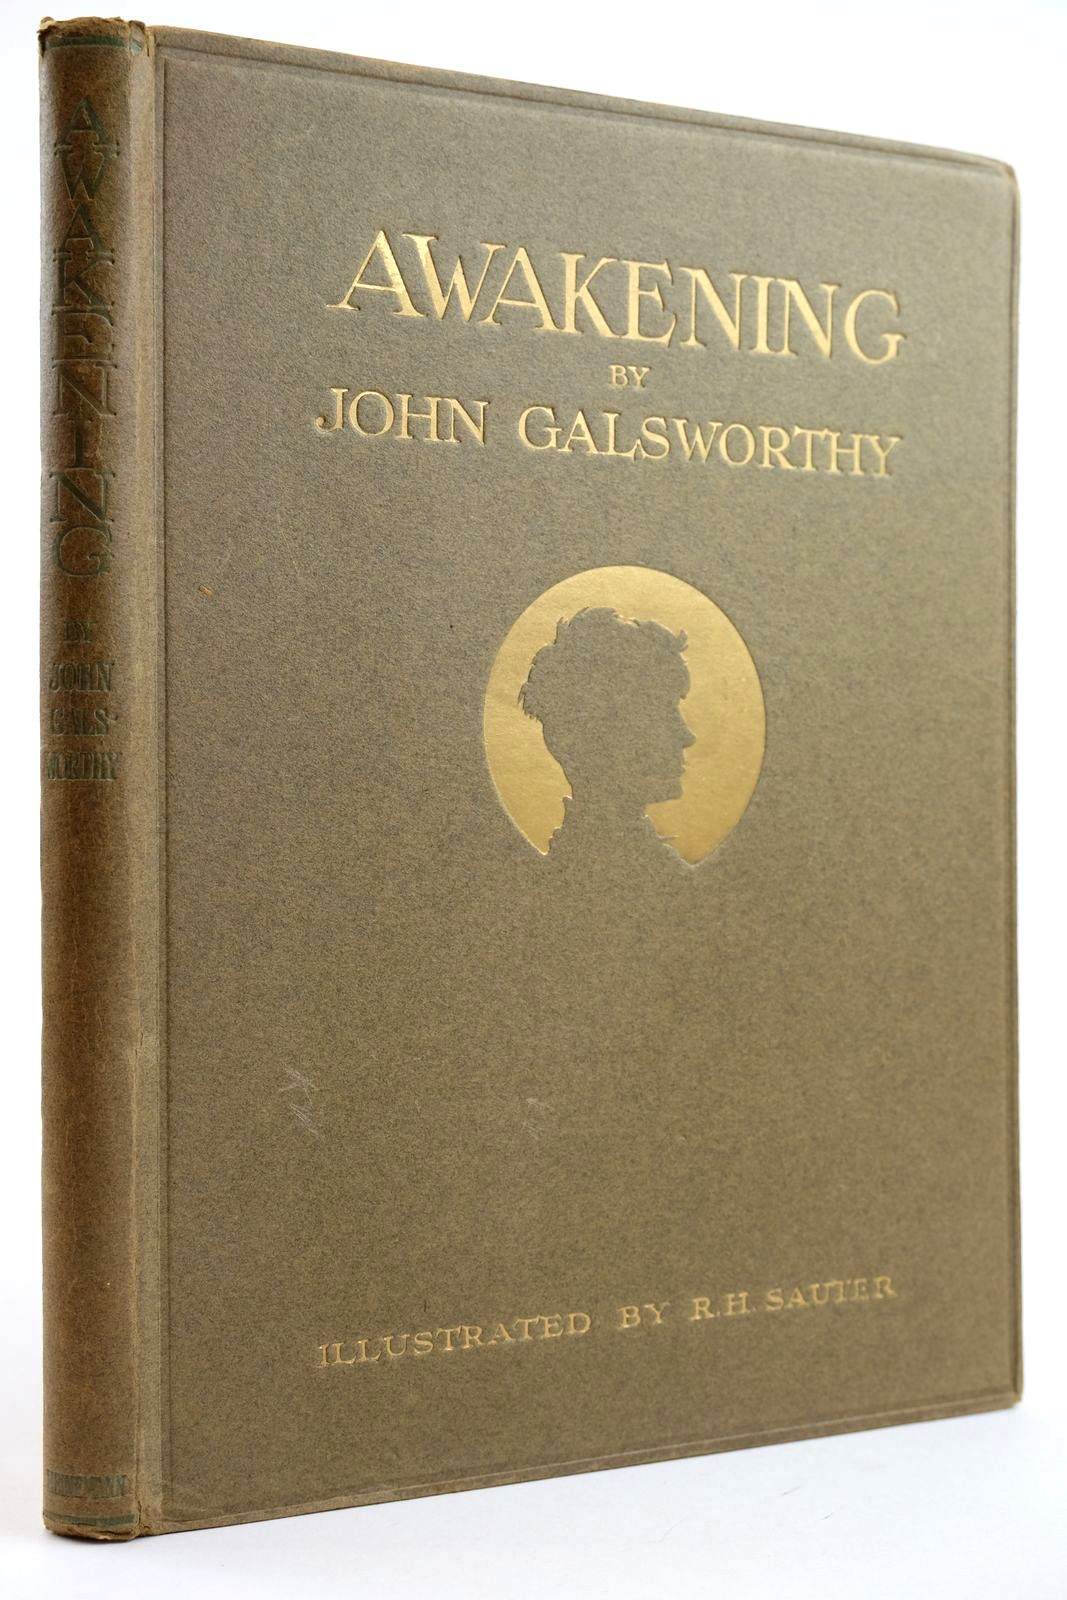 Photo of AWAKENING written by Galsworthy, John illustrated by Sauter, R.H. published by William Heinemann (STOCK CODE: 2132132)  for sale by Stella & Rose's Books